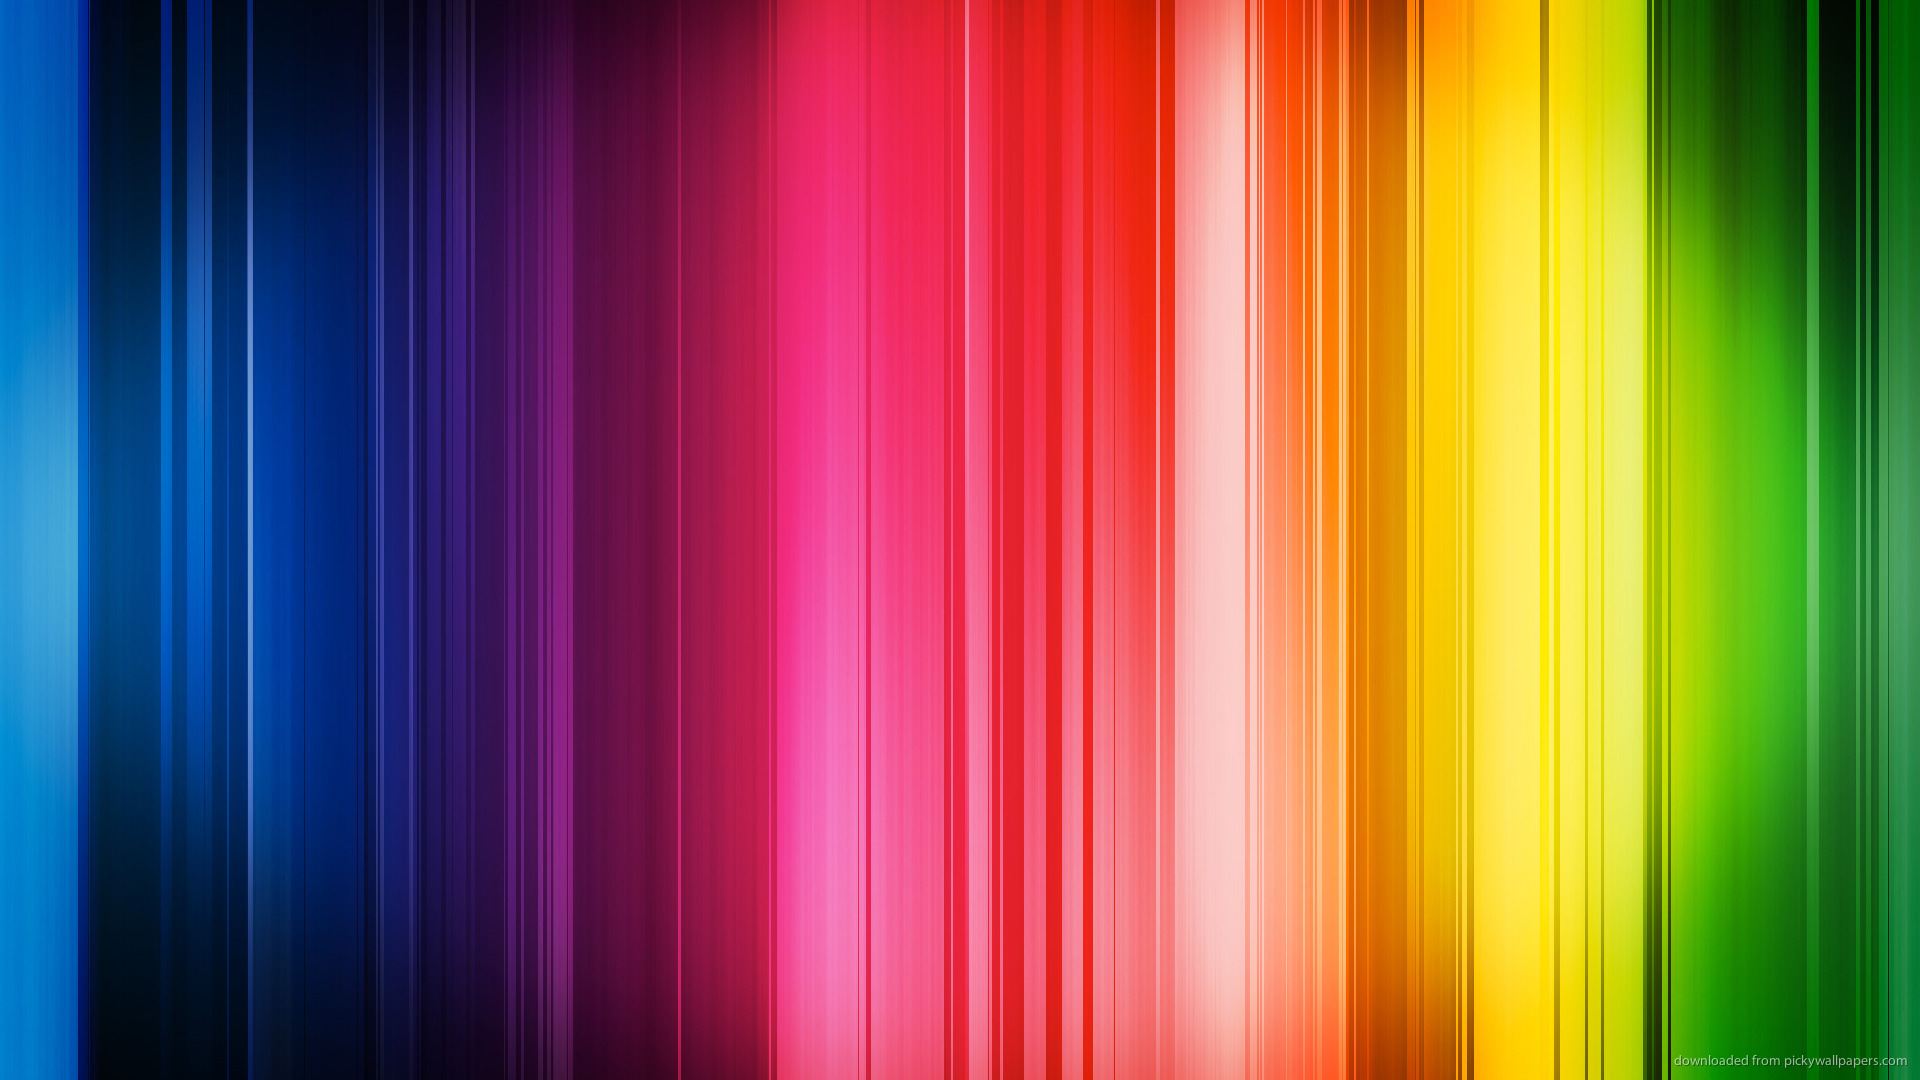  color] [itemTitle] Array [0] wallpaper [1] wallpapers